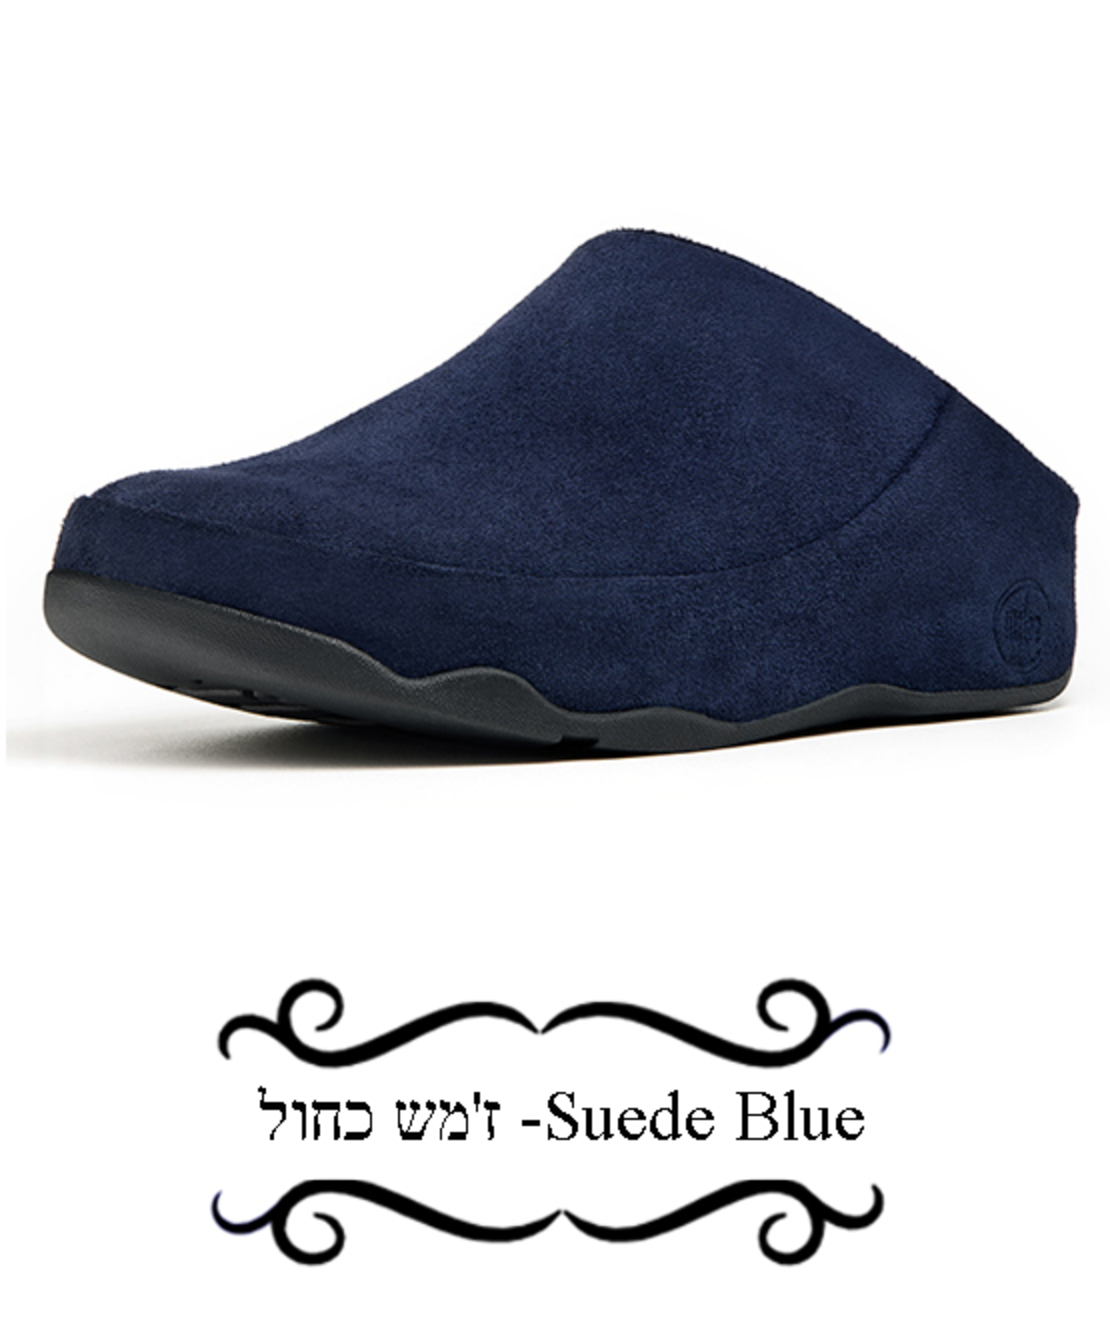 Gogh Suede - FitFlop - Women closed clogs